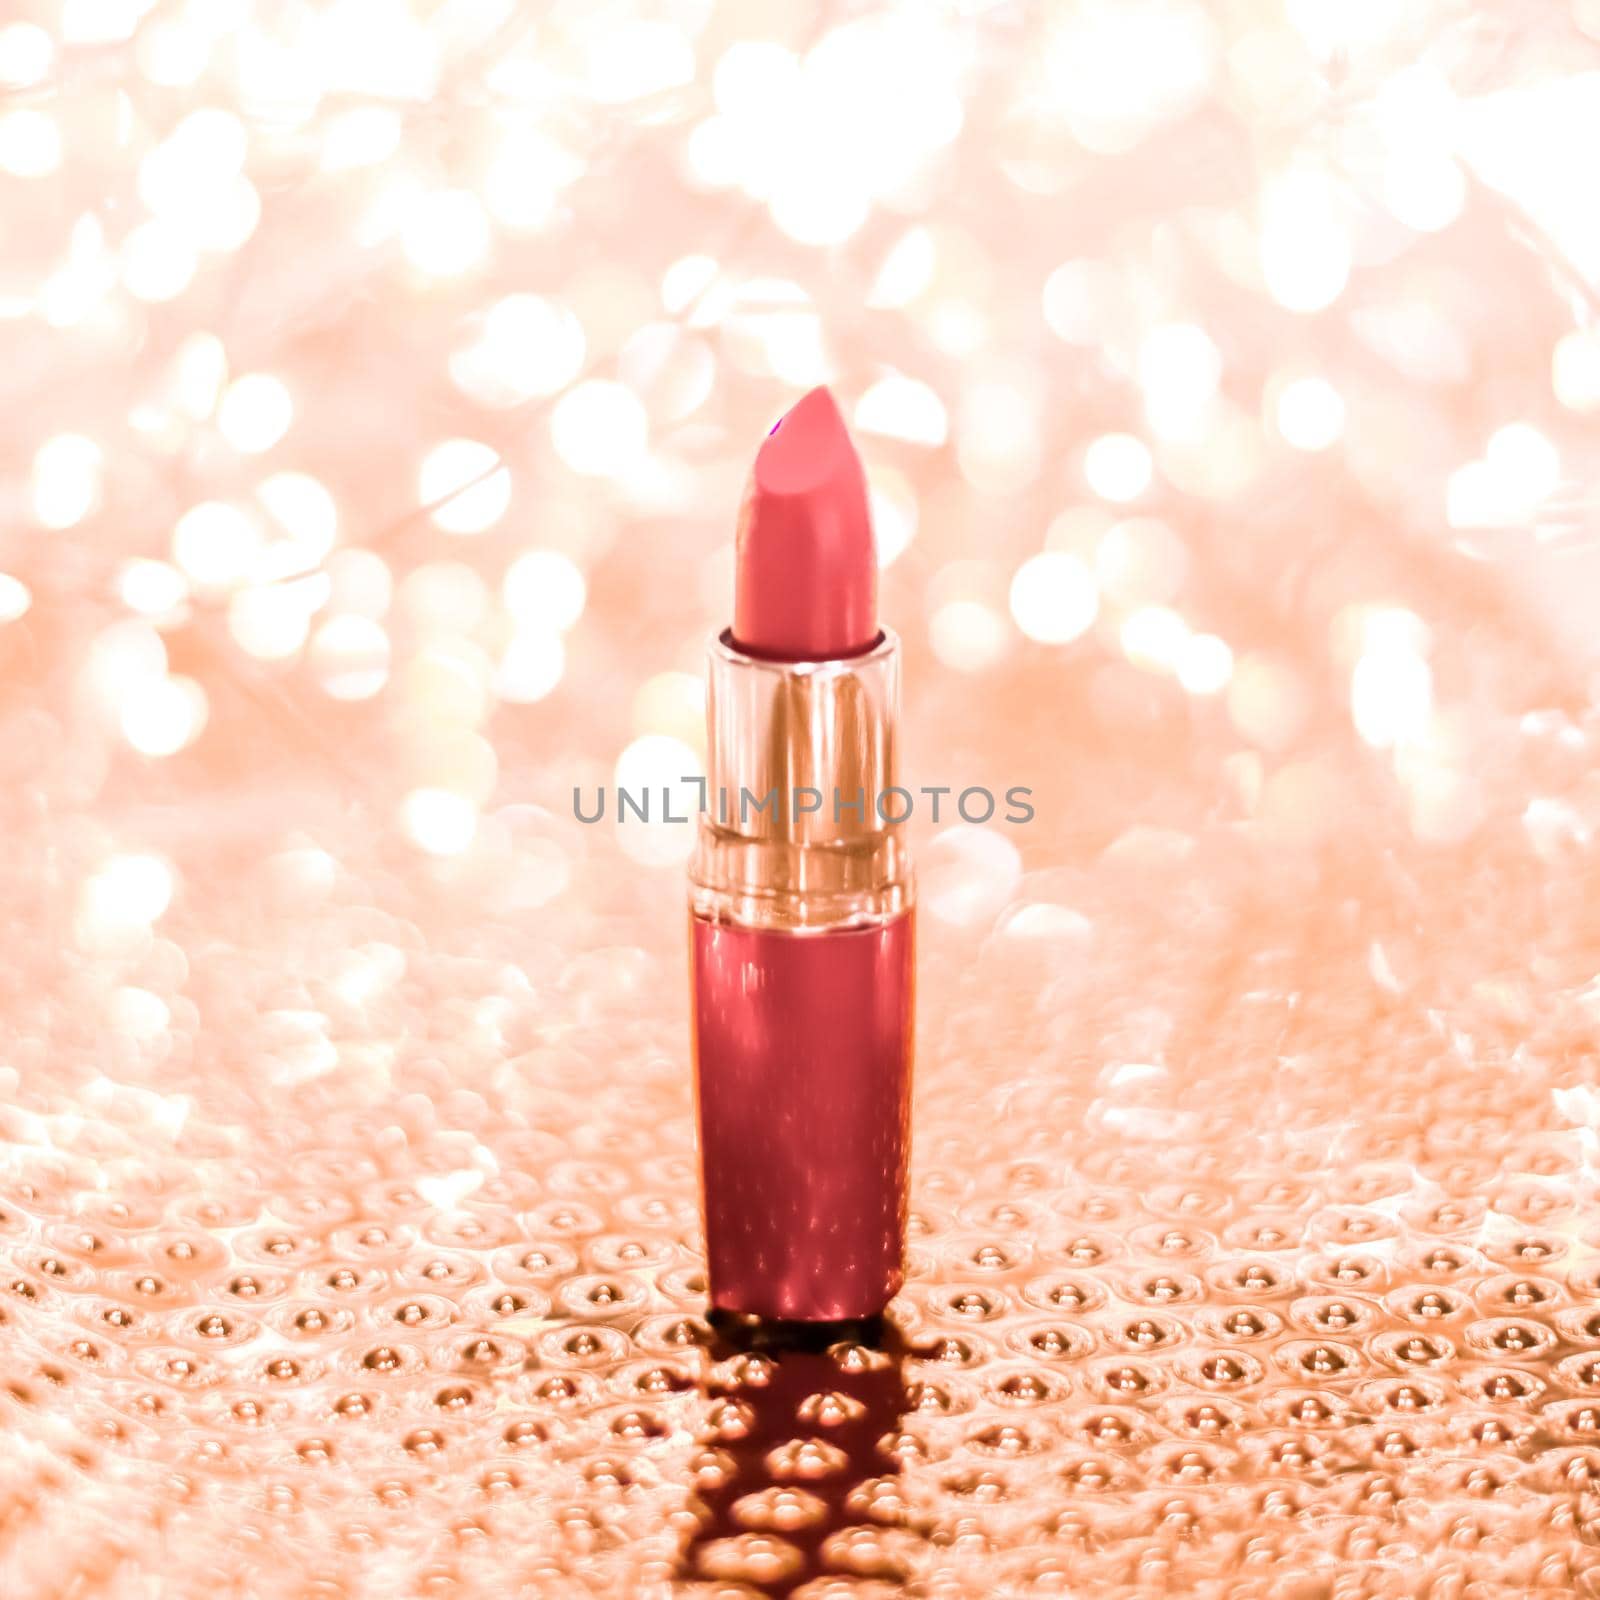 Coral lipstick on rose gold Christmas, New Years and Valentines Day holiday glitter background, make-up and cosmetics product for luxury beauty brand by Anneleven